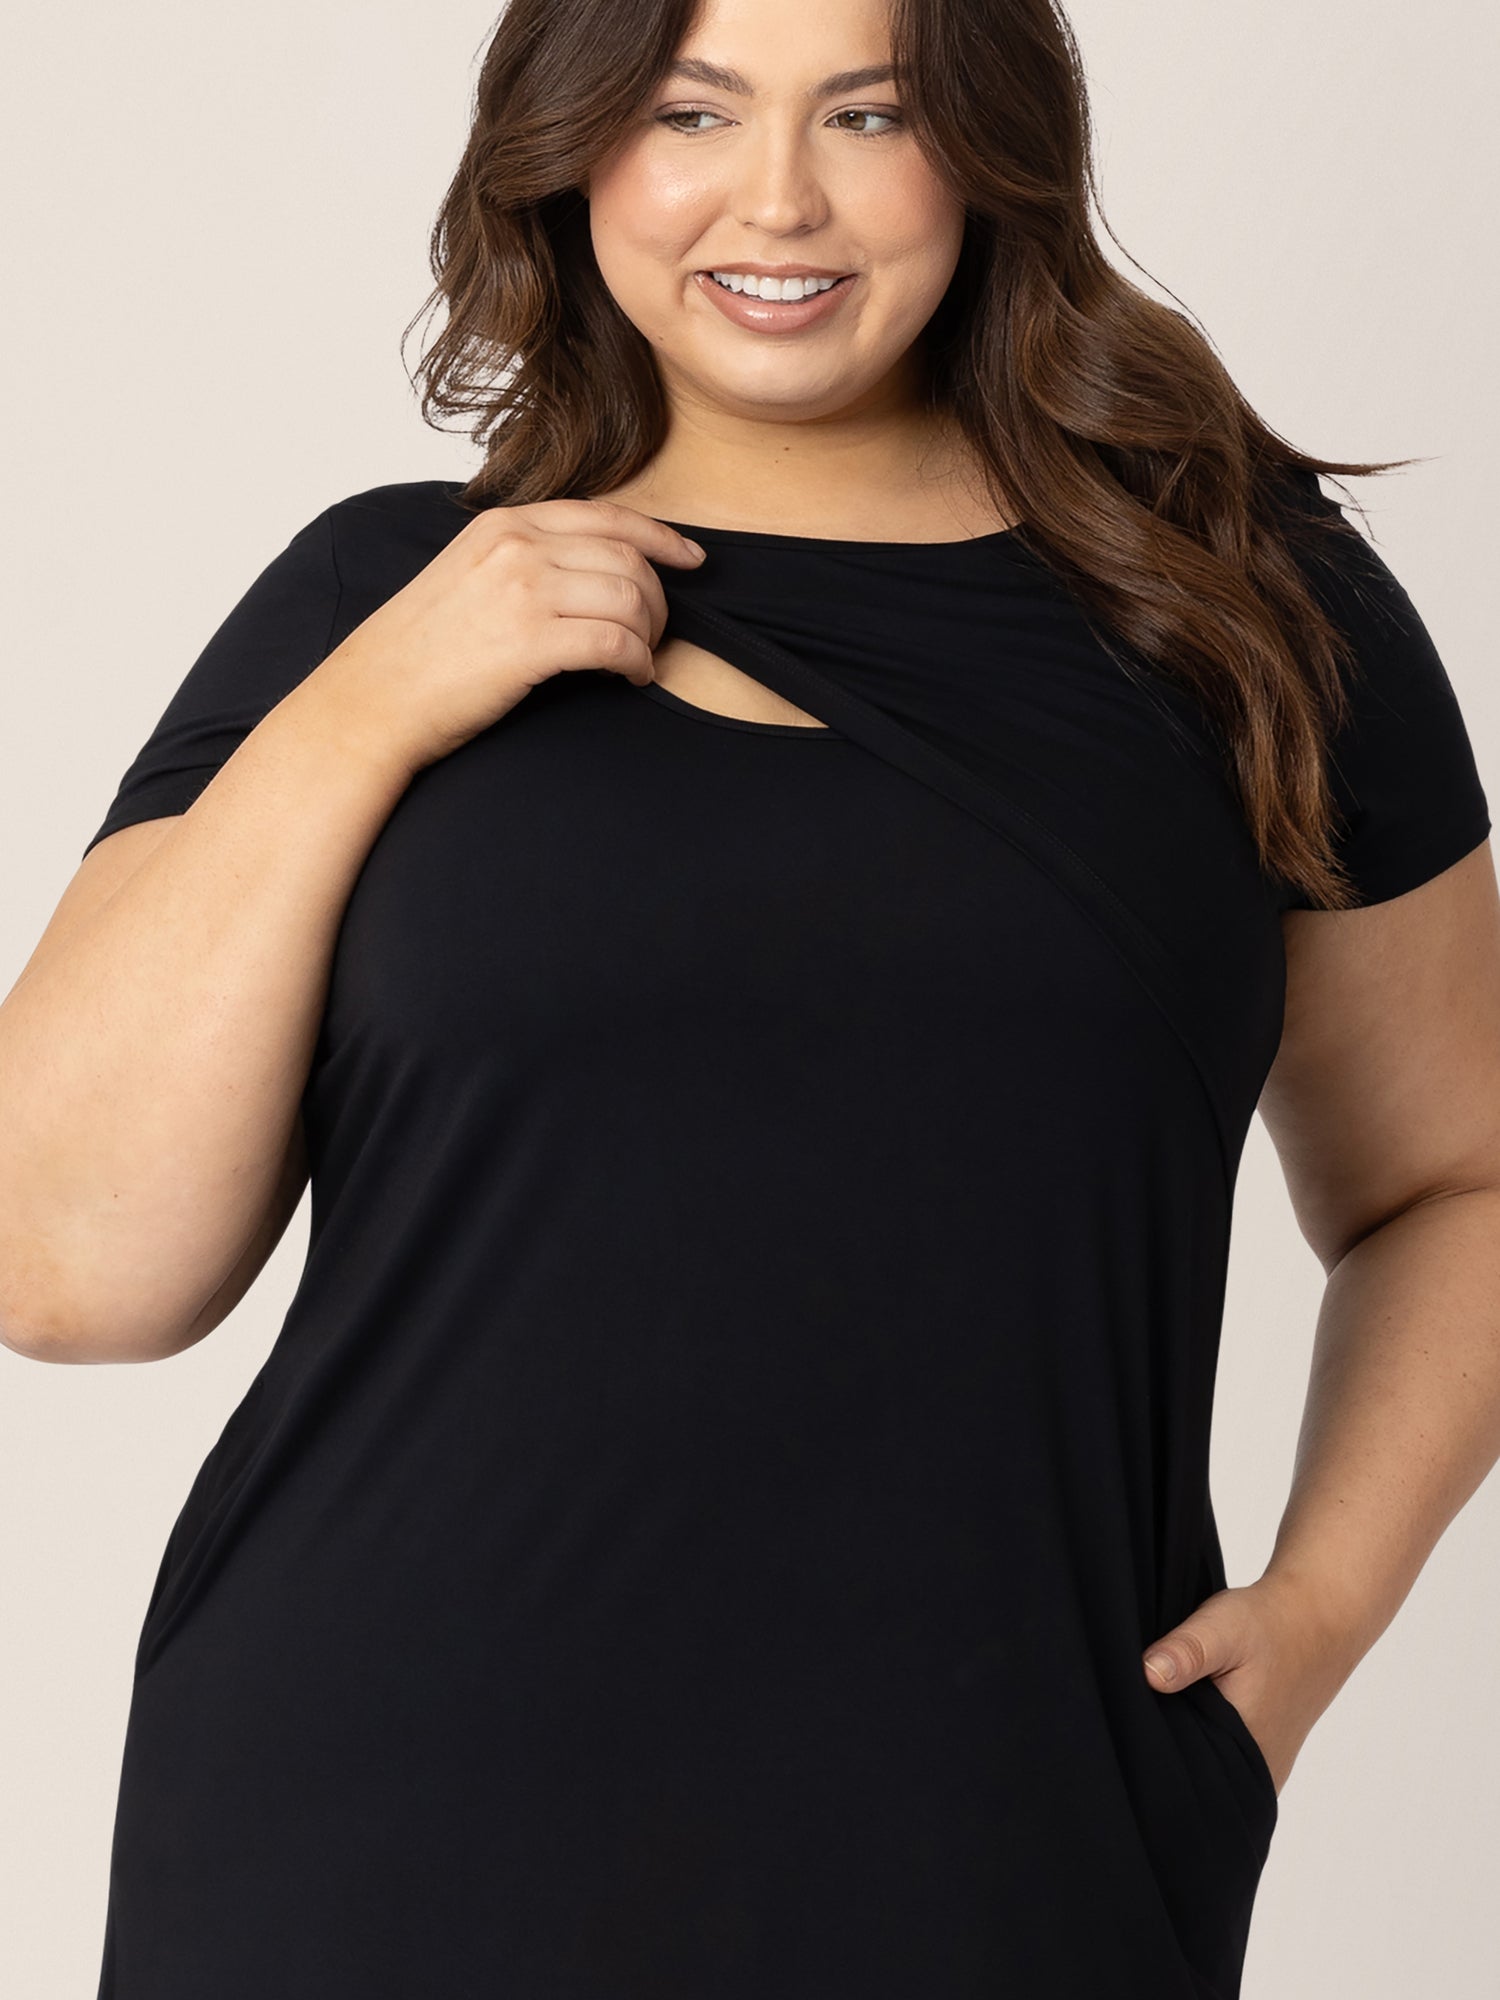 Model pulling up the convenient pull up nursing panel on the Eleanora Bamboo Maternity & Nursing Dress in Black.